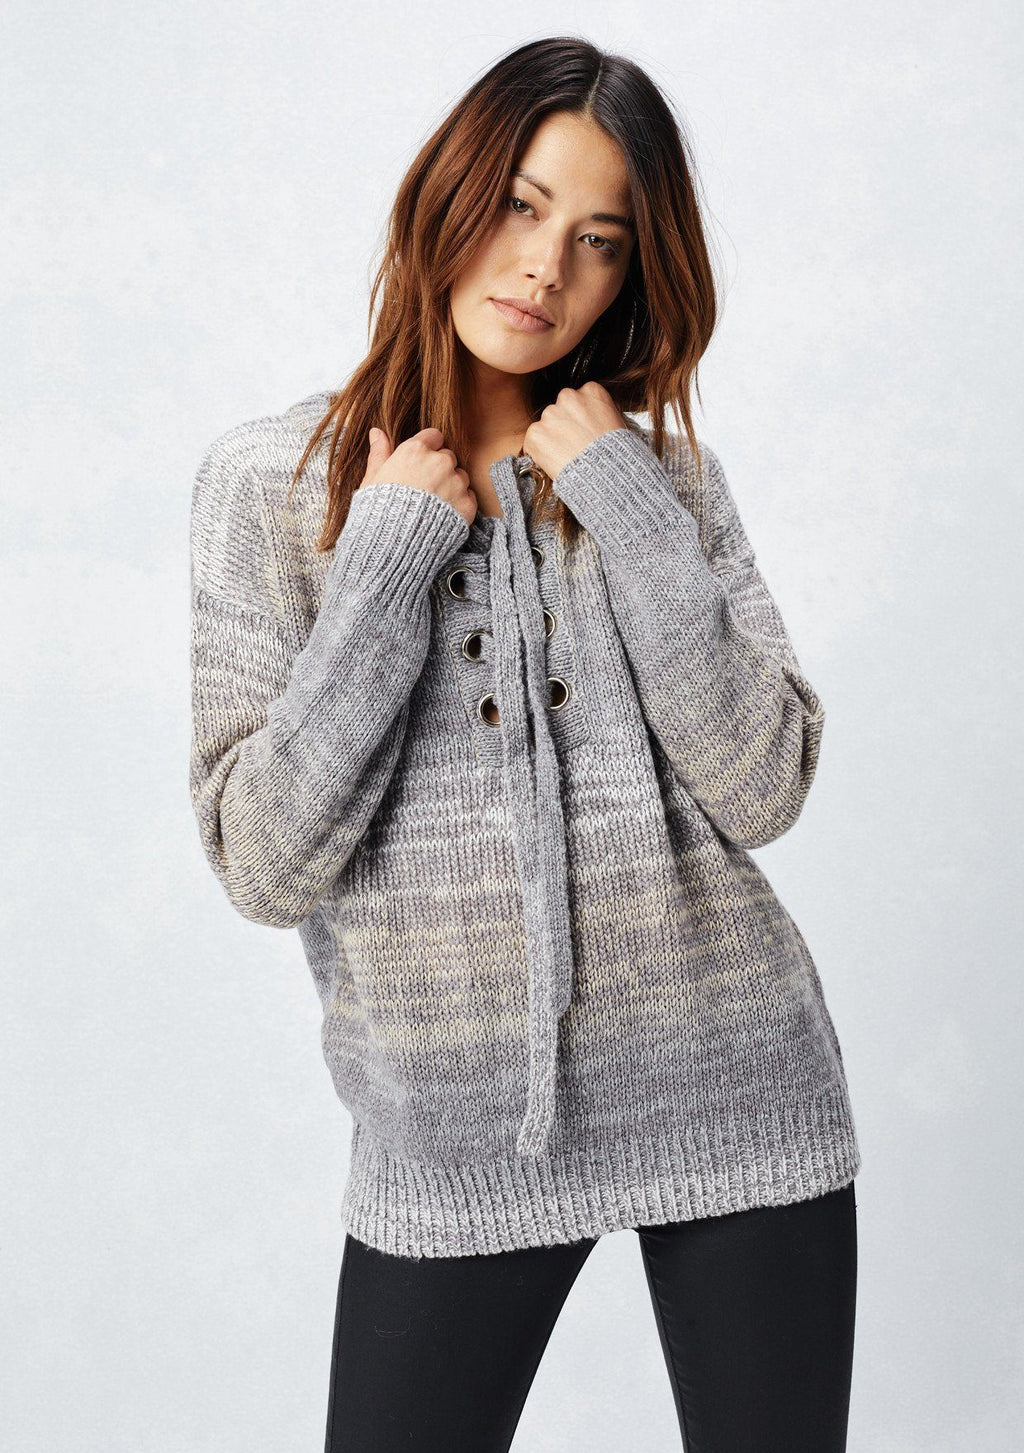 Chic and Flattering Lace-Up Pullover Sweater - LOVESTITCH